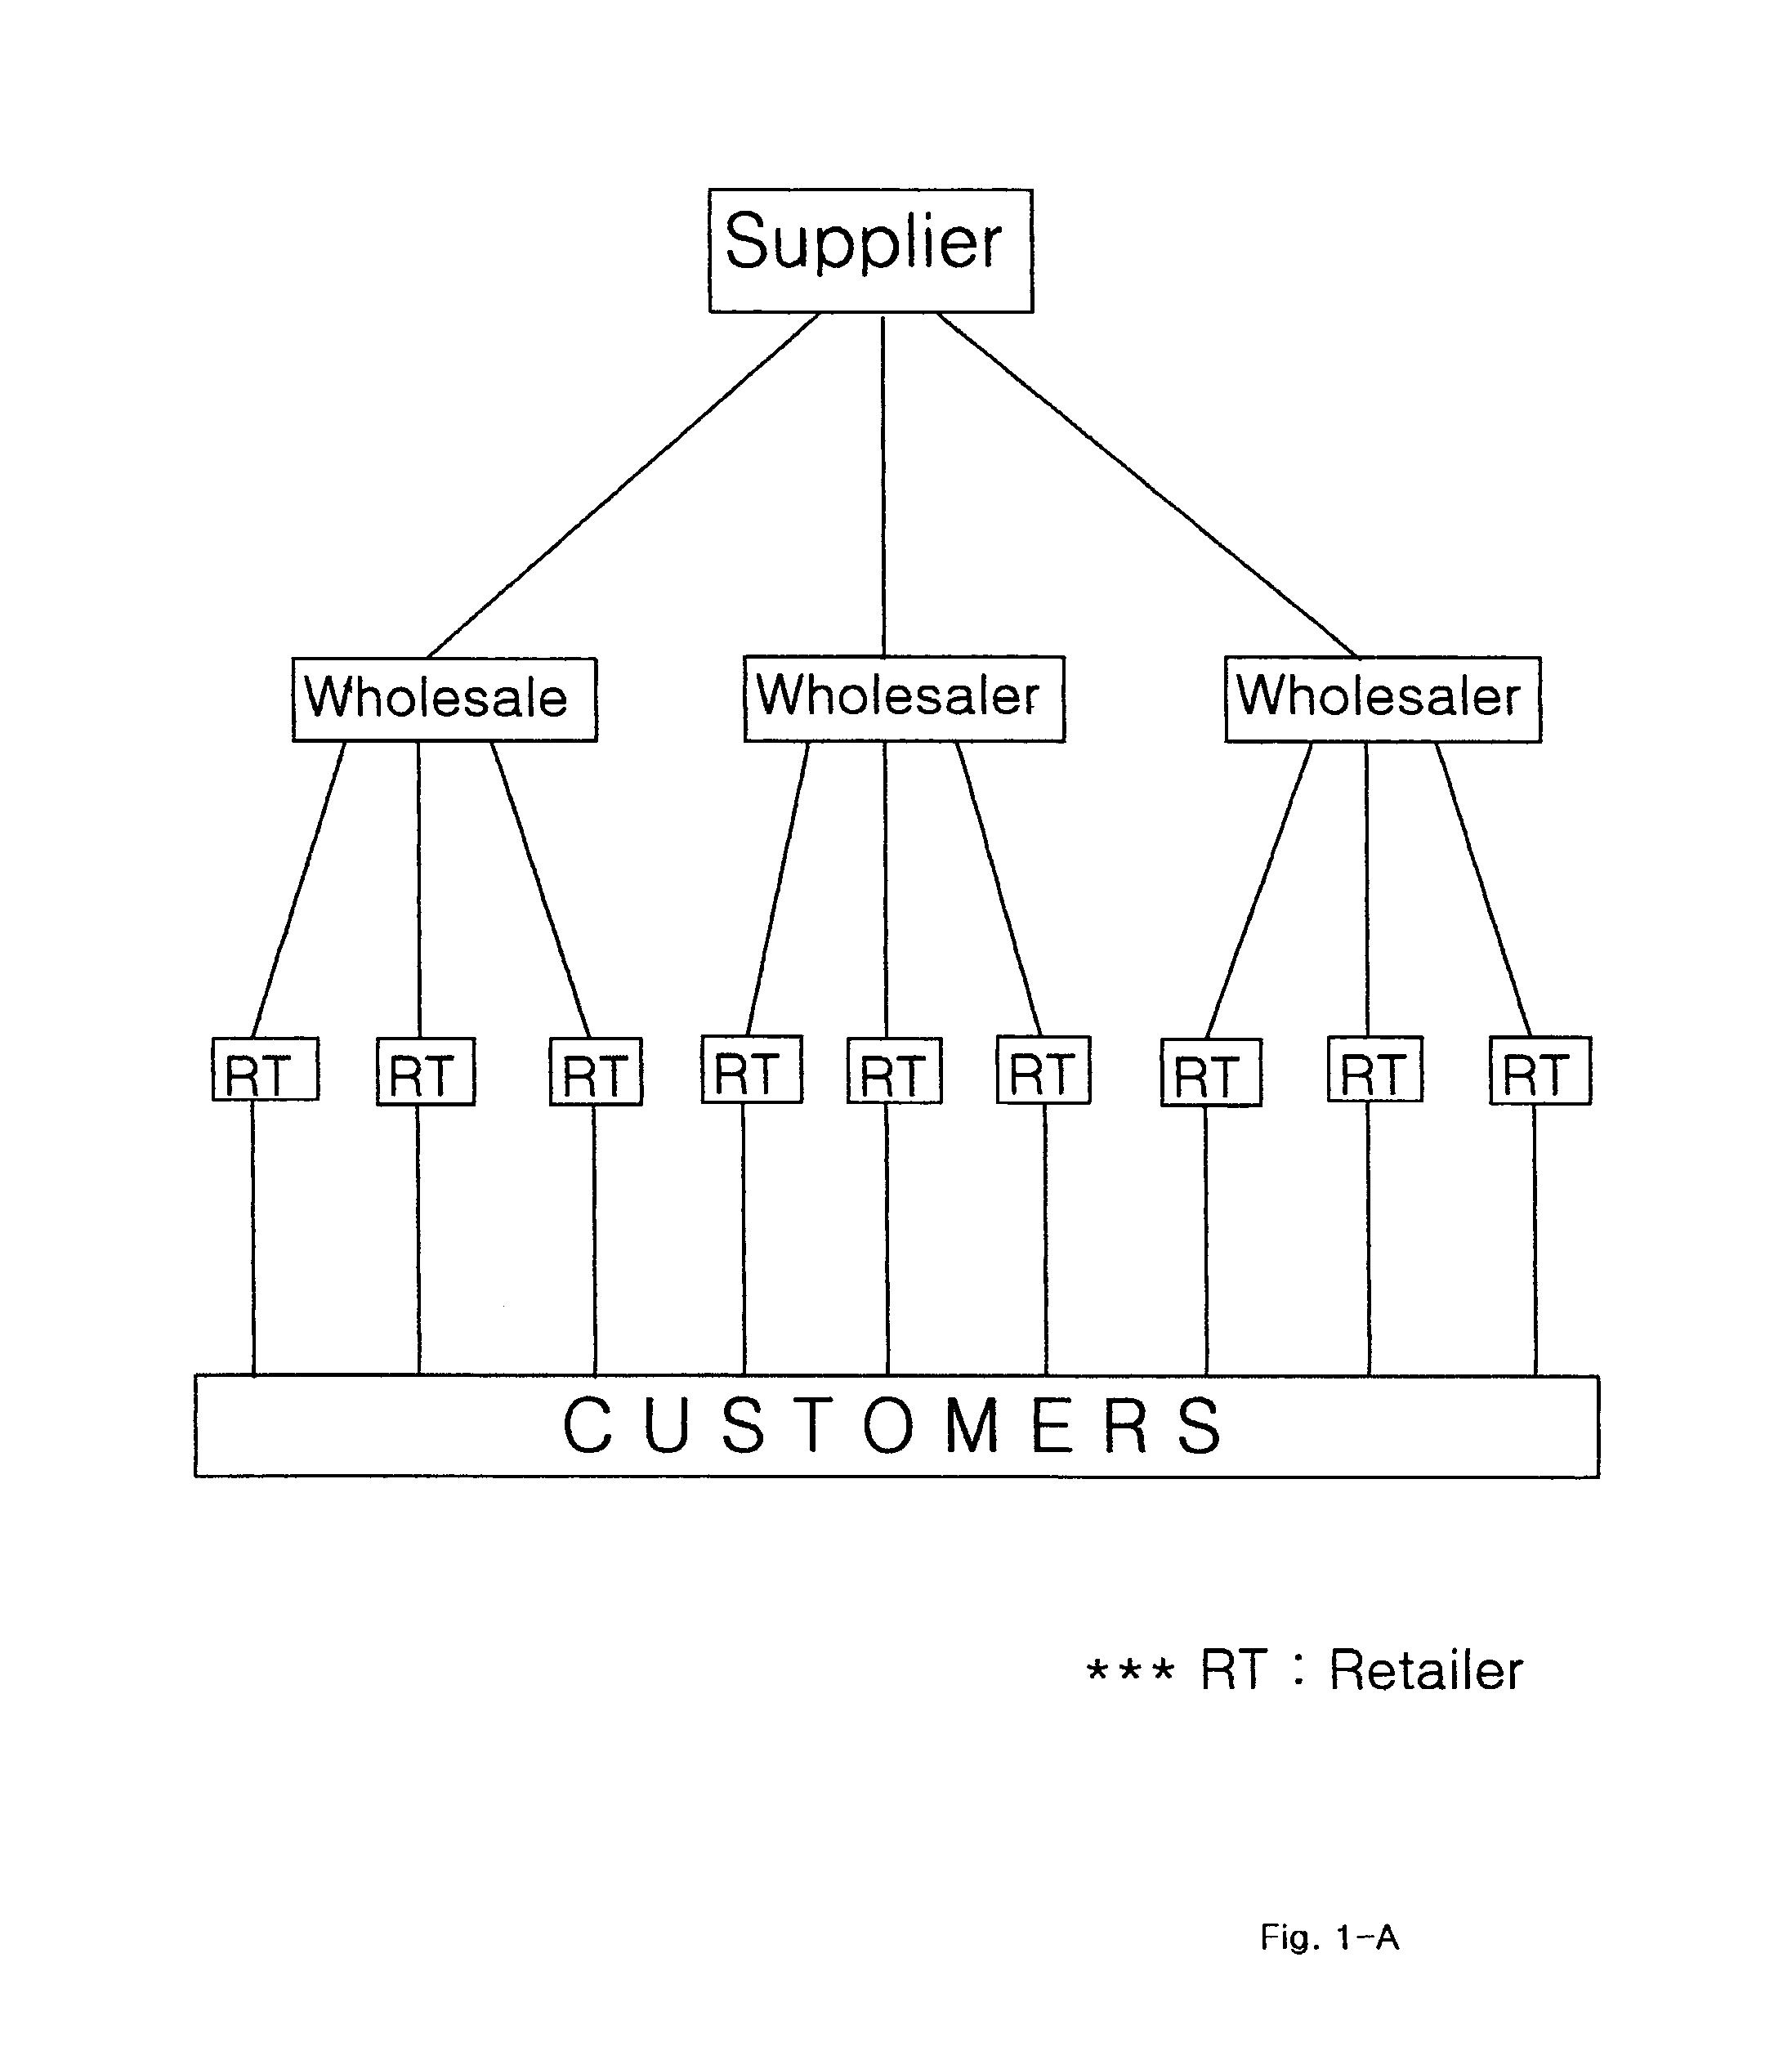 Direct distribution system for consumer goods and services